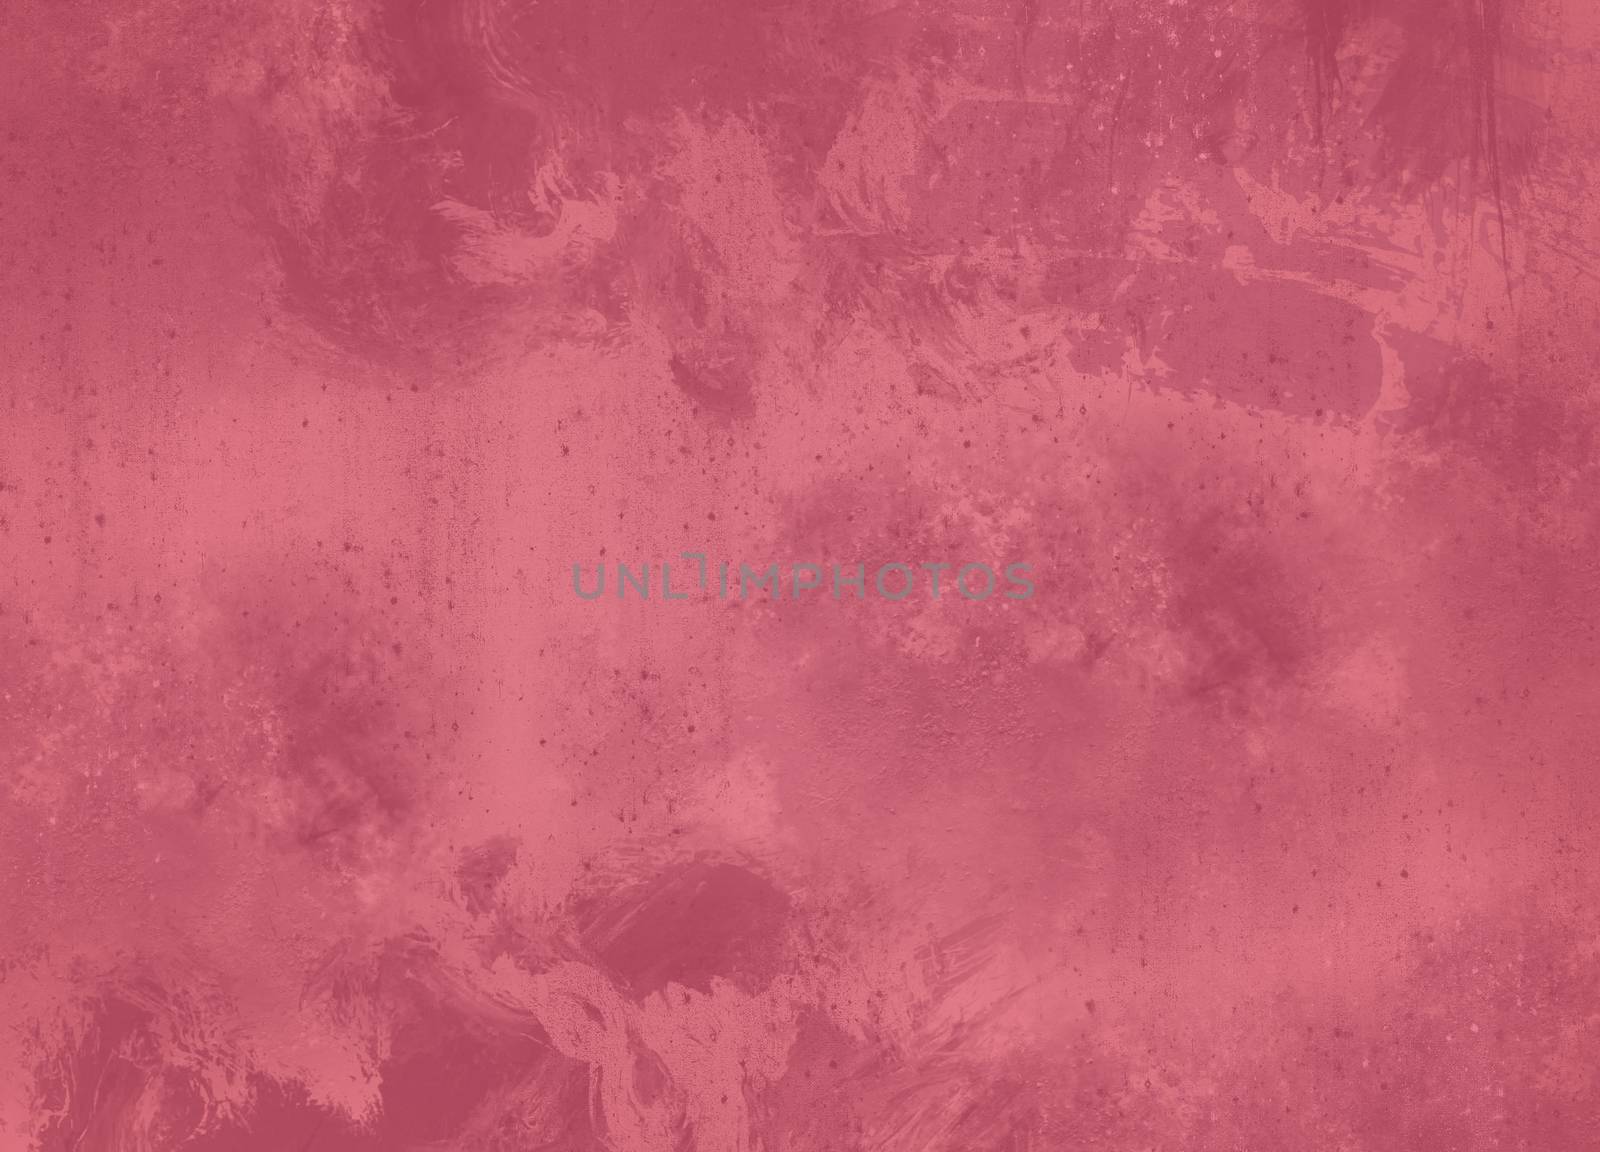 Rusty grunge background with texture and pink colors by Sportactive